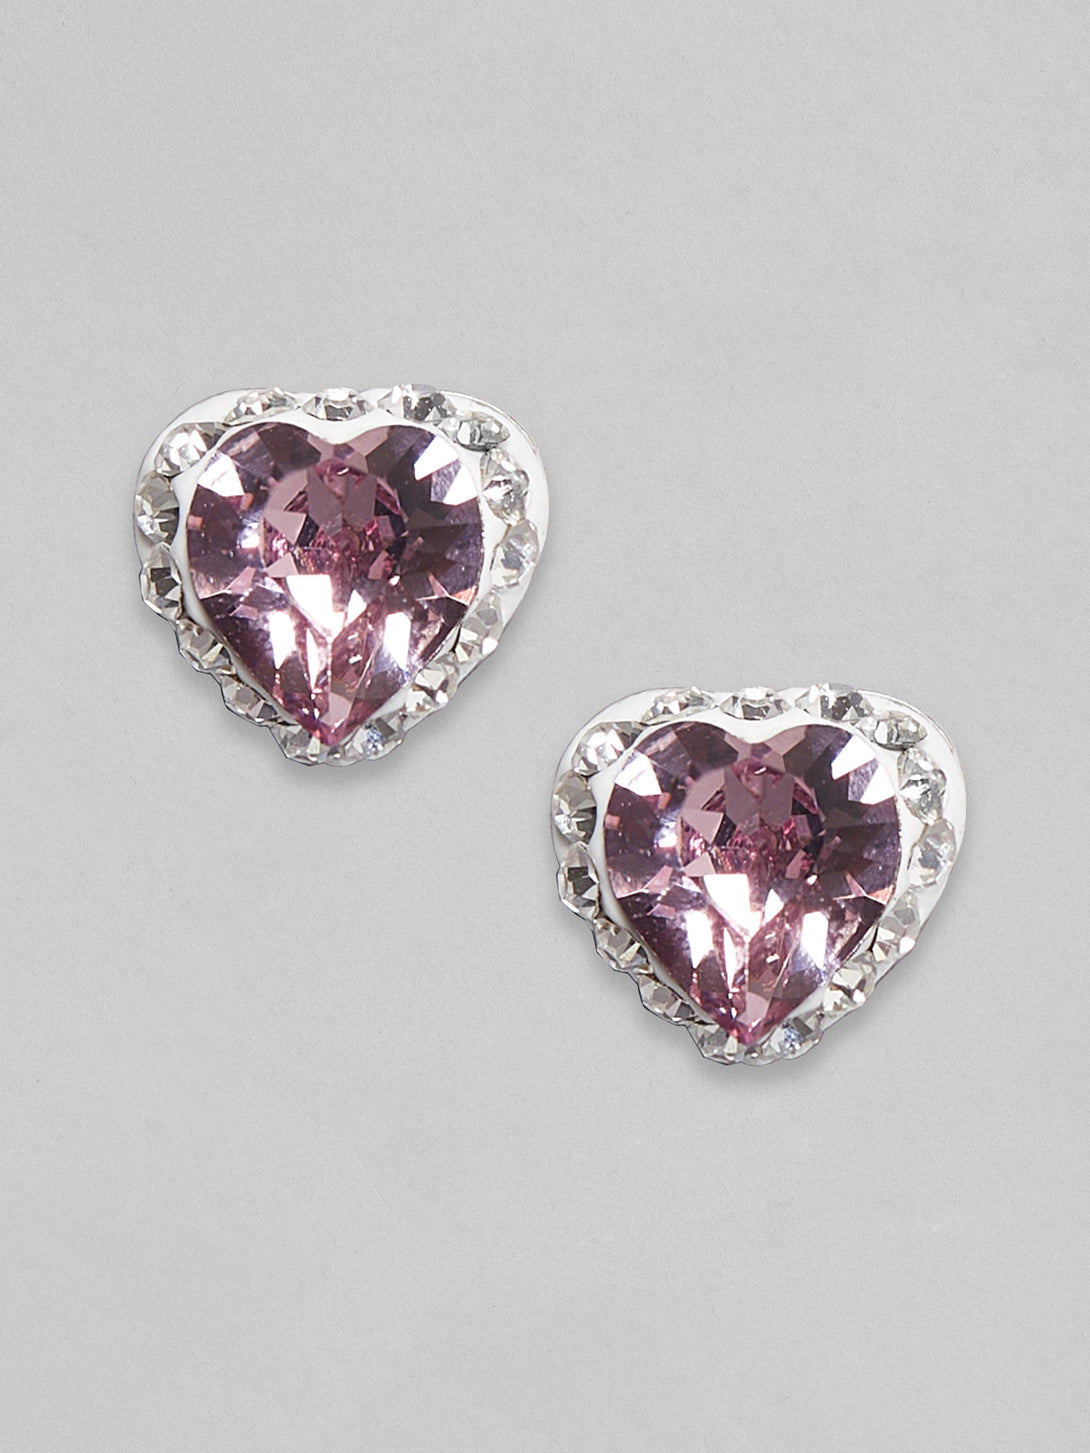 The Heart Is In Pink - Stud Earrings - Indiakreations